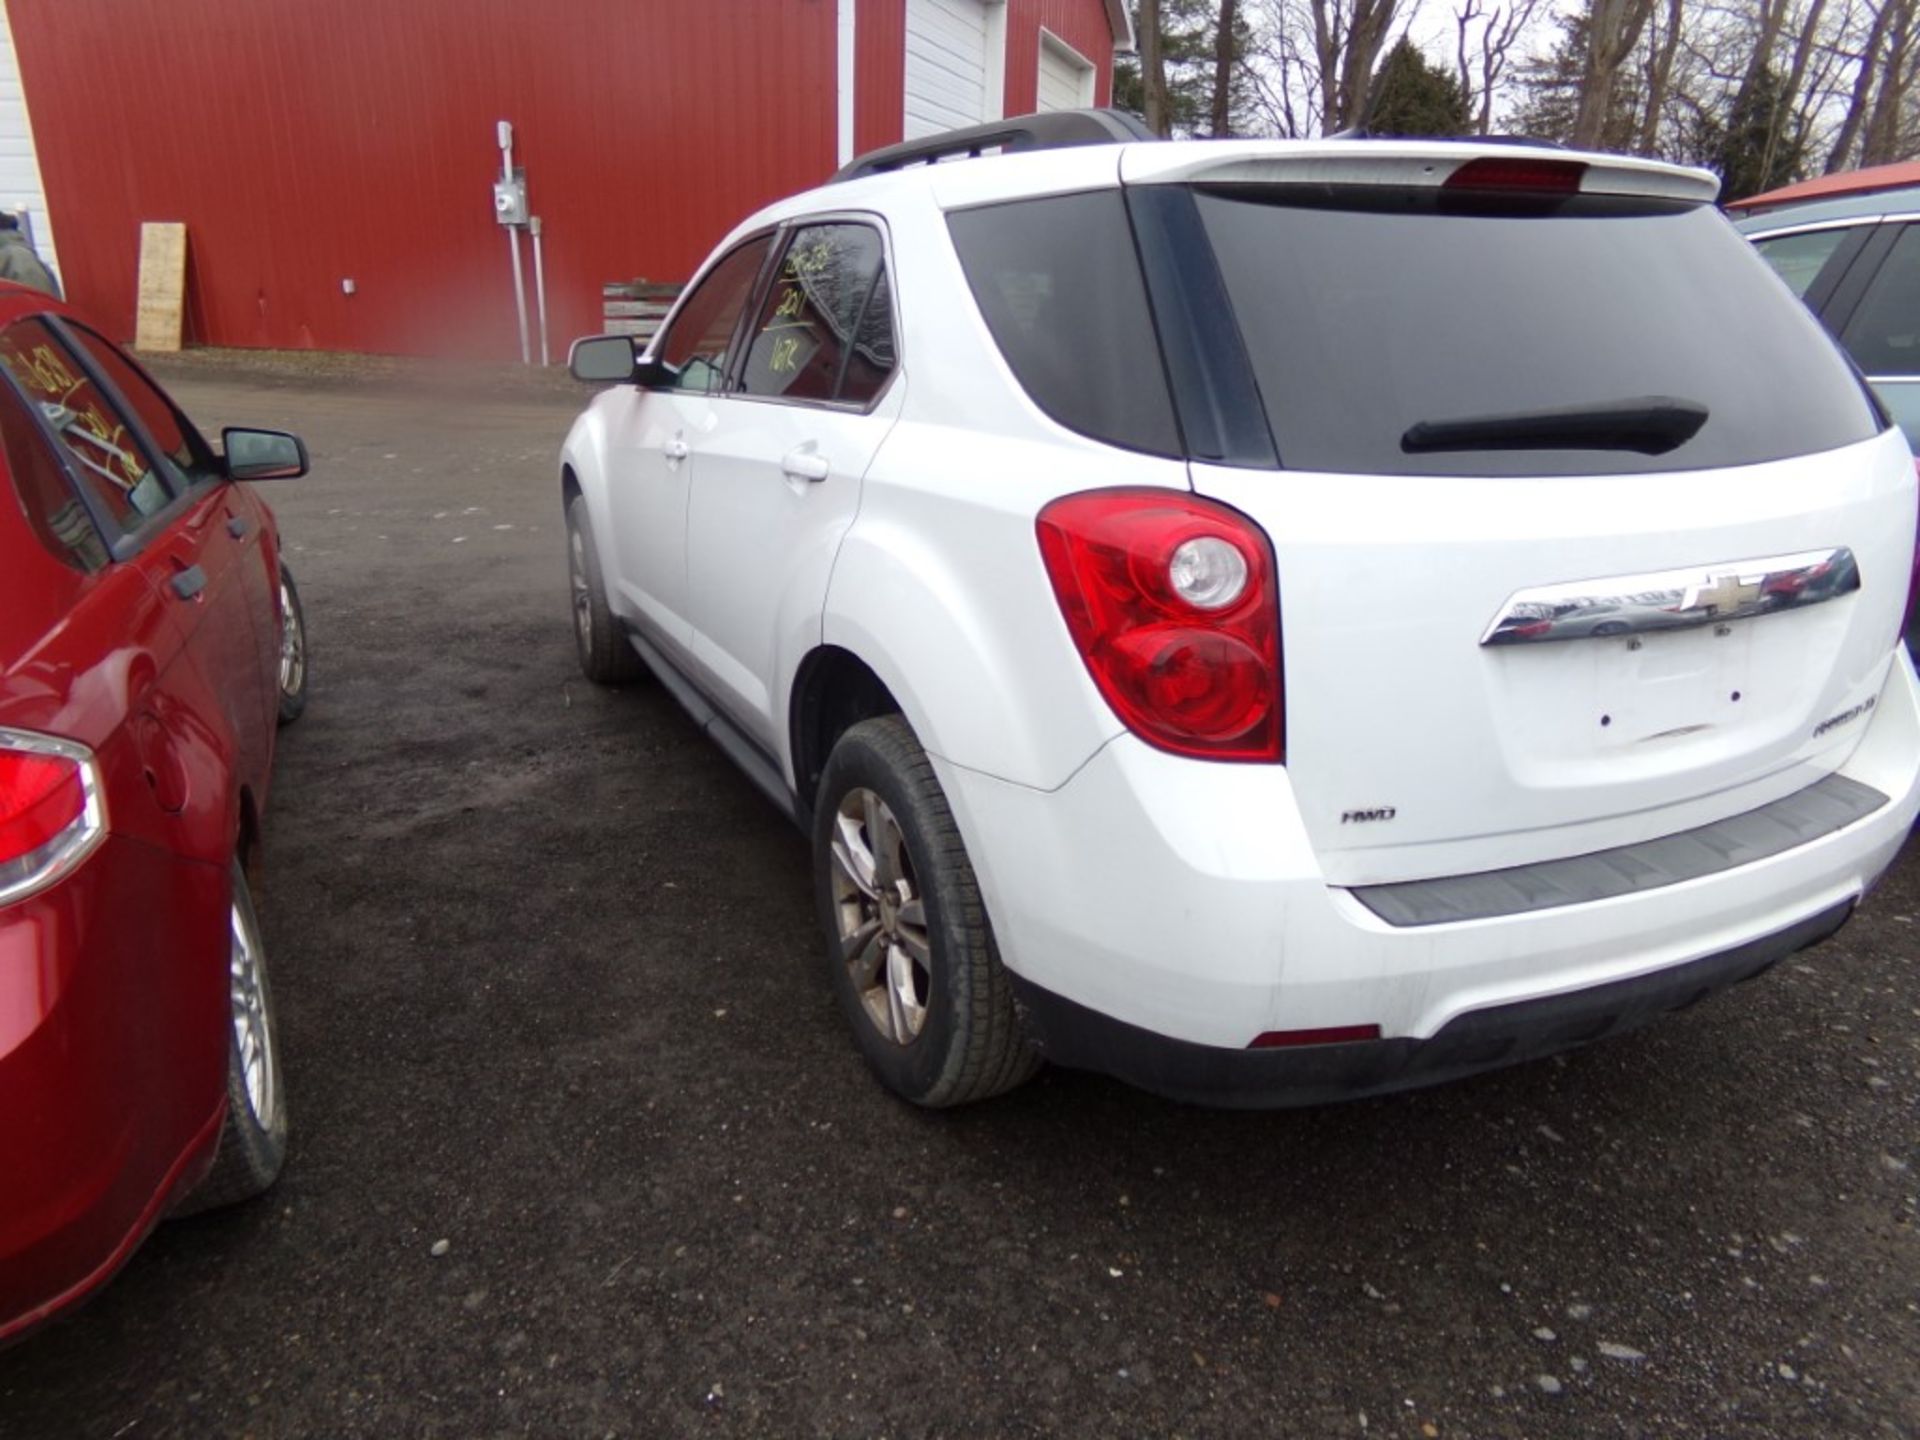 2011 Chevrolet Equinox LT, AWD, Suroof, White, 167,772 Miles, VIN#: 2CNFLEEC1B6326445 - OPEN TO - Image 2 of 6